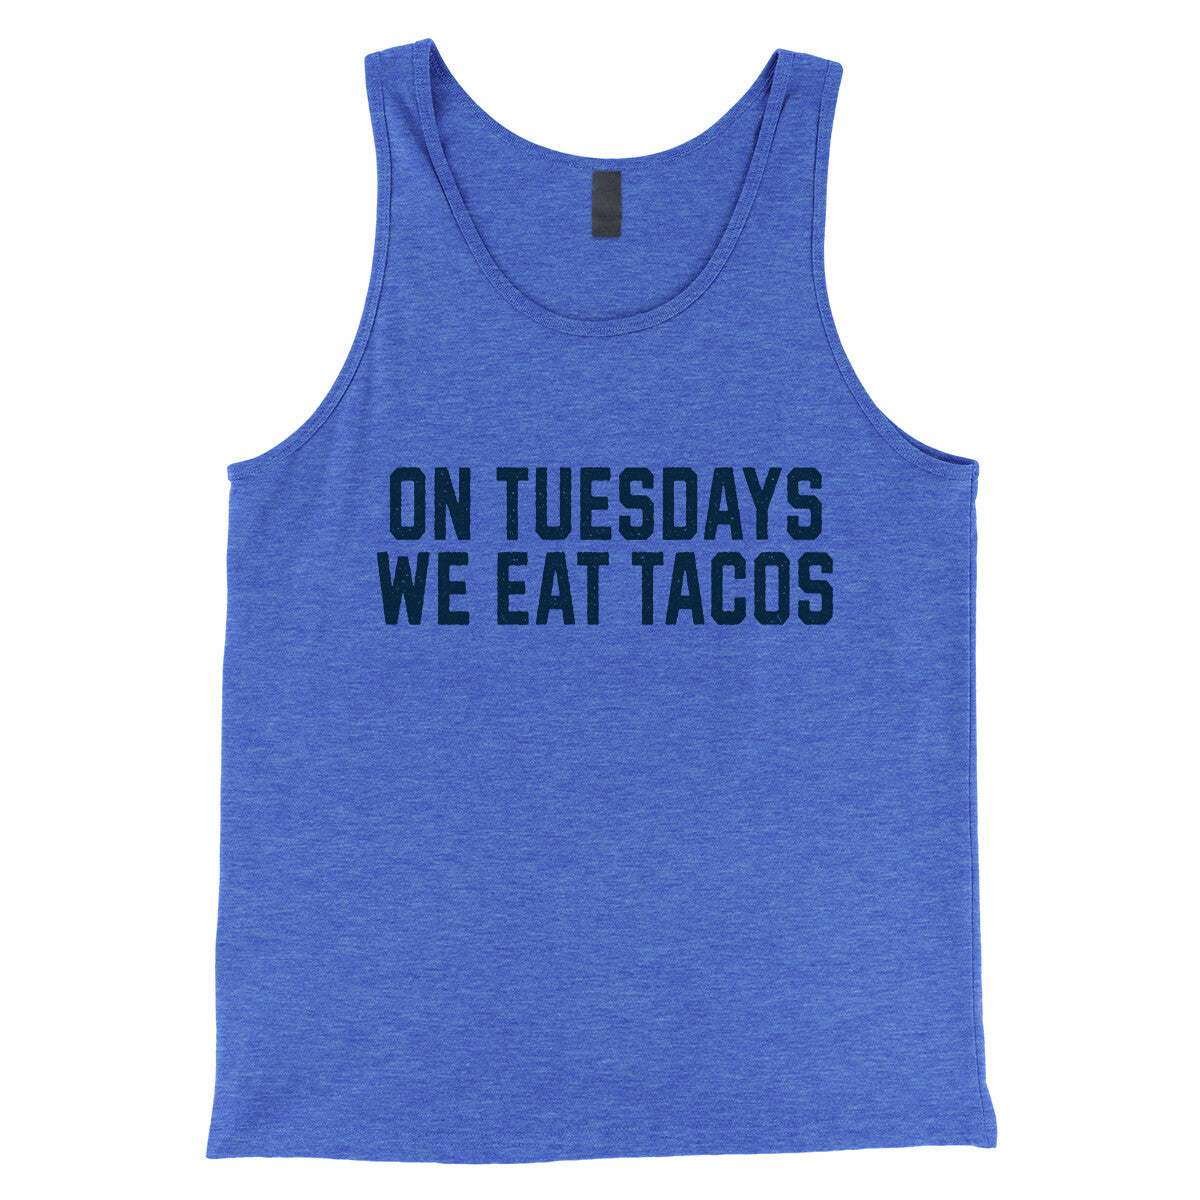 On Tuesdays We Eat Tacos in True Royal TriBlend Color